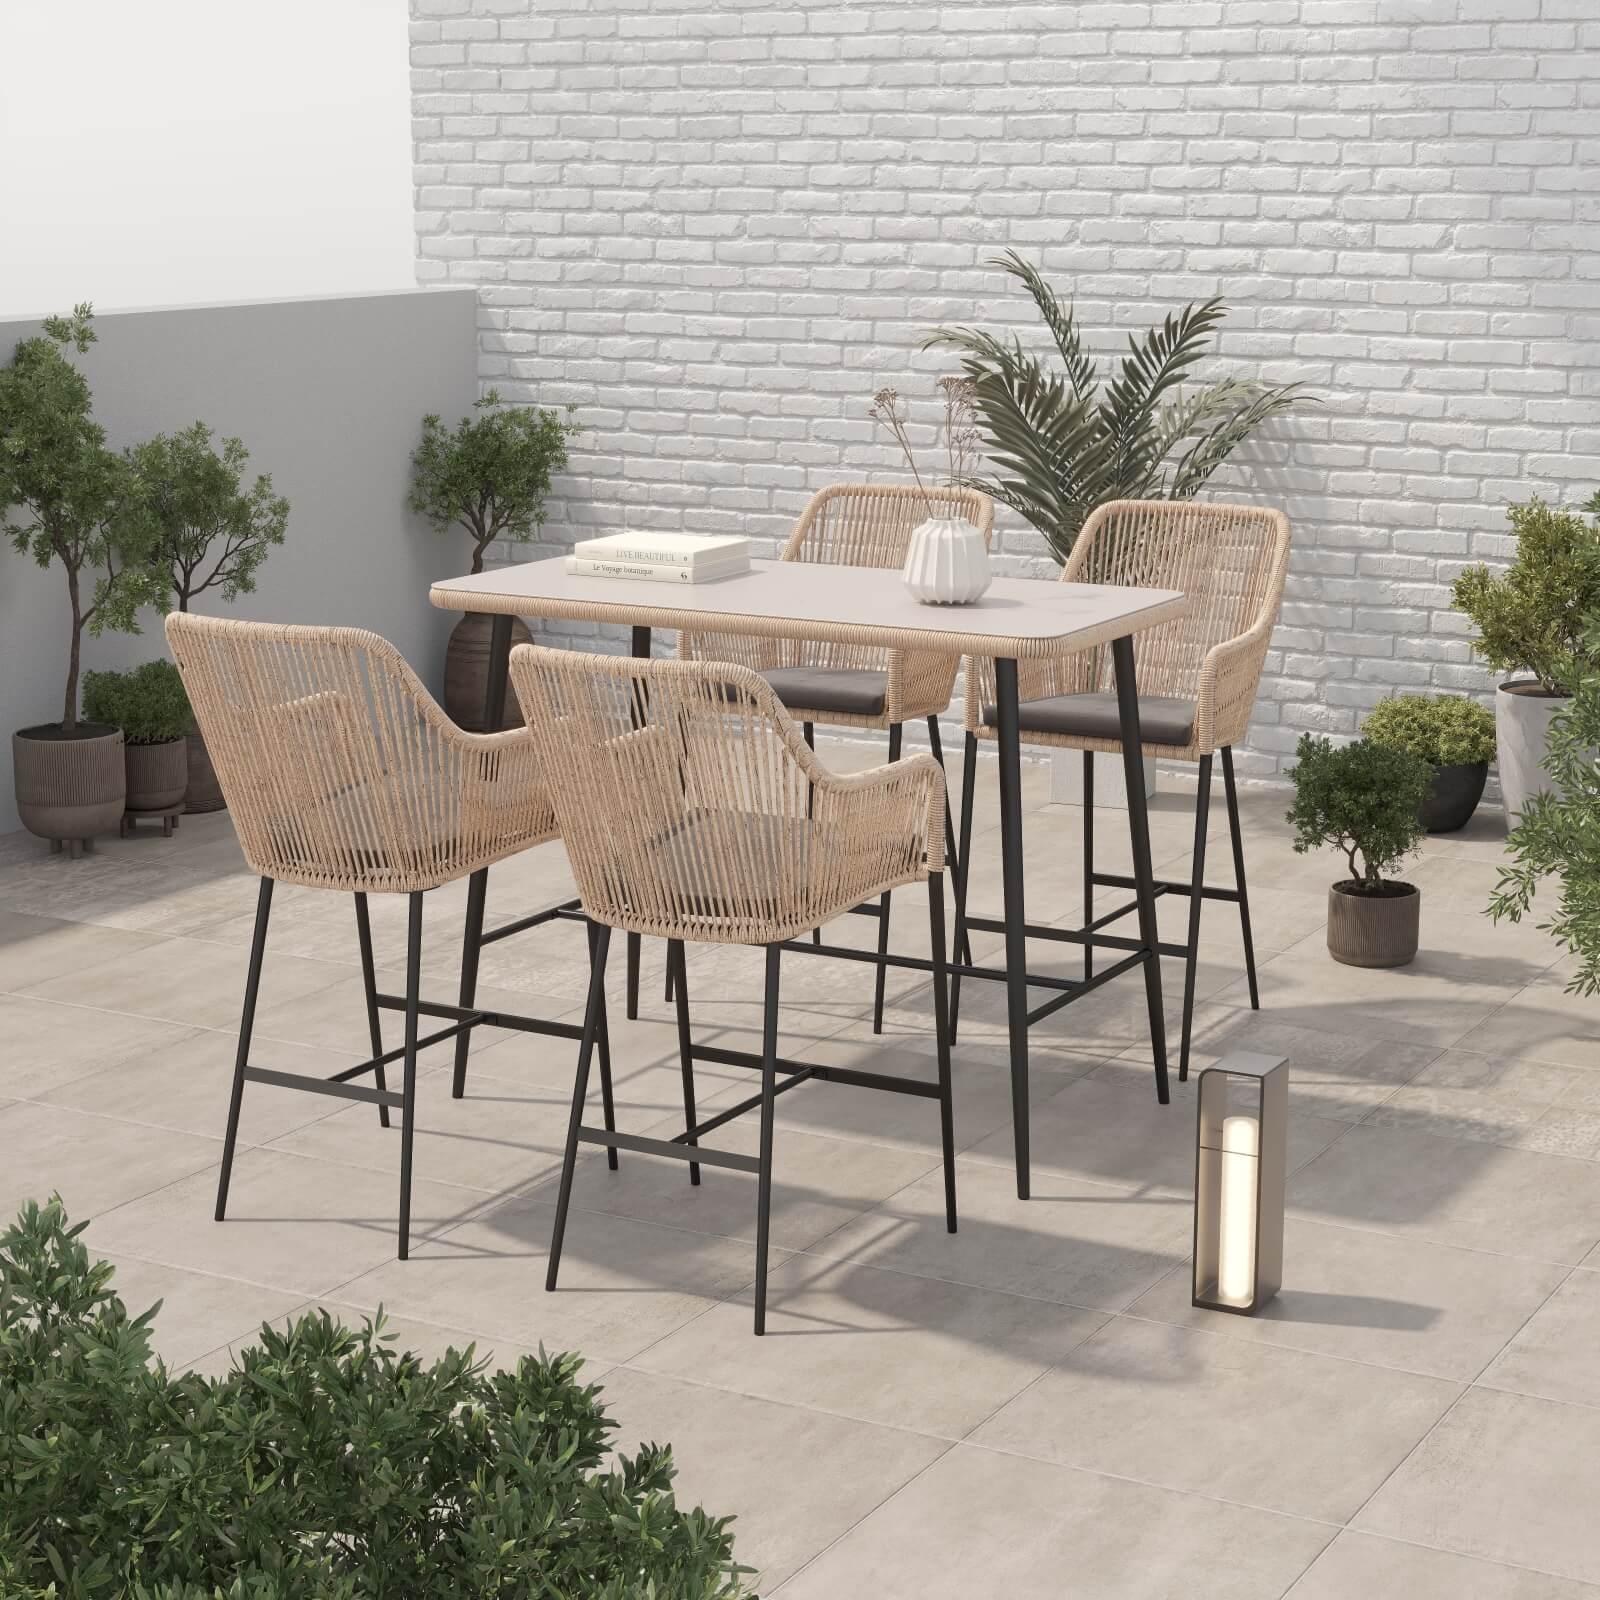 Hallerbos 5-piece outdoor bar height set with steel frame and natural twisted rattan design, 1 bar table, 4 bar chairs, side view - Jardina Furniture